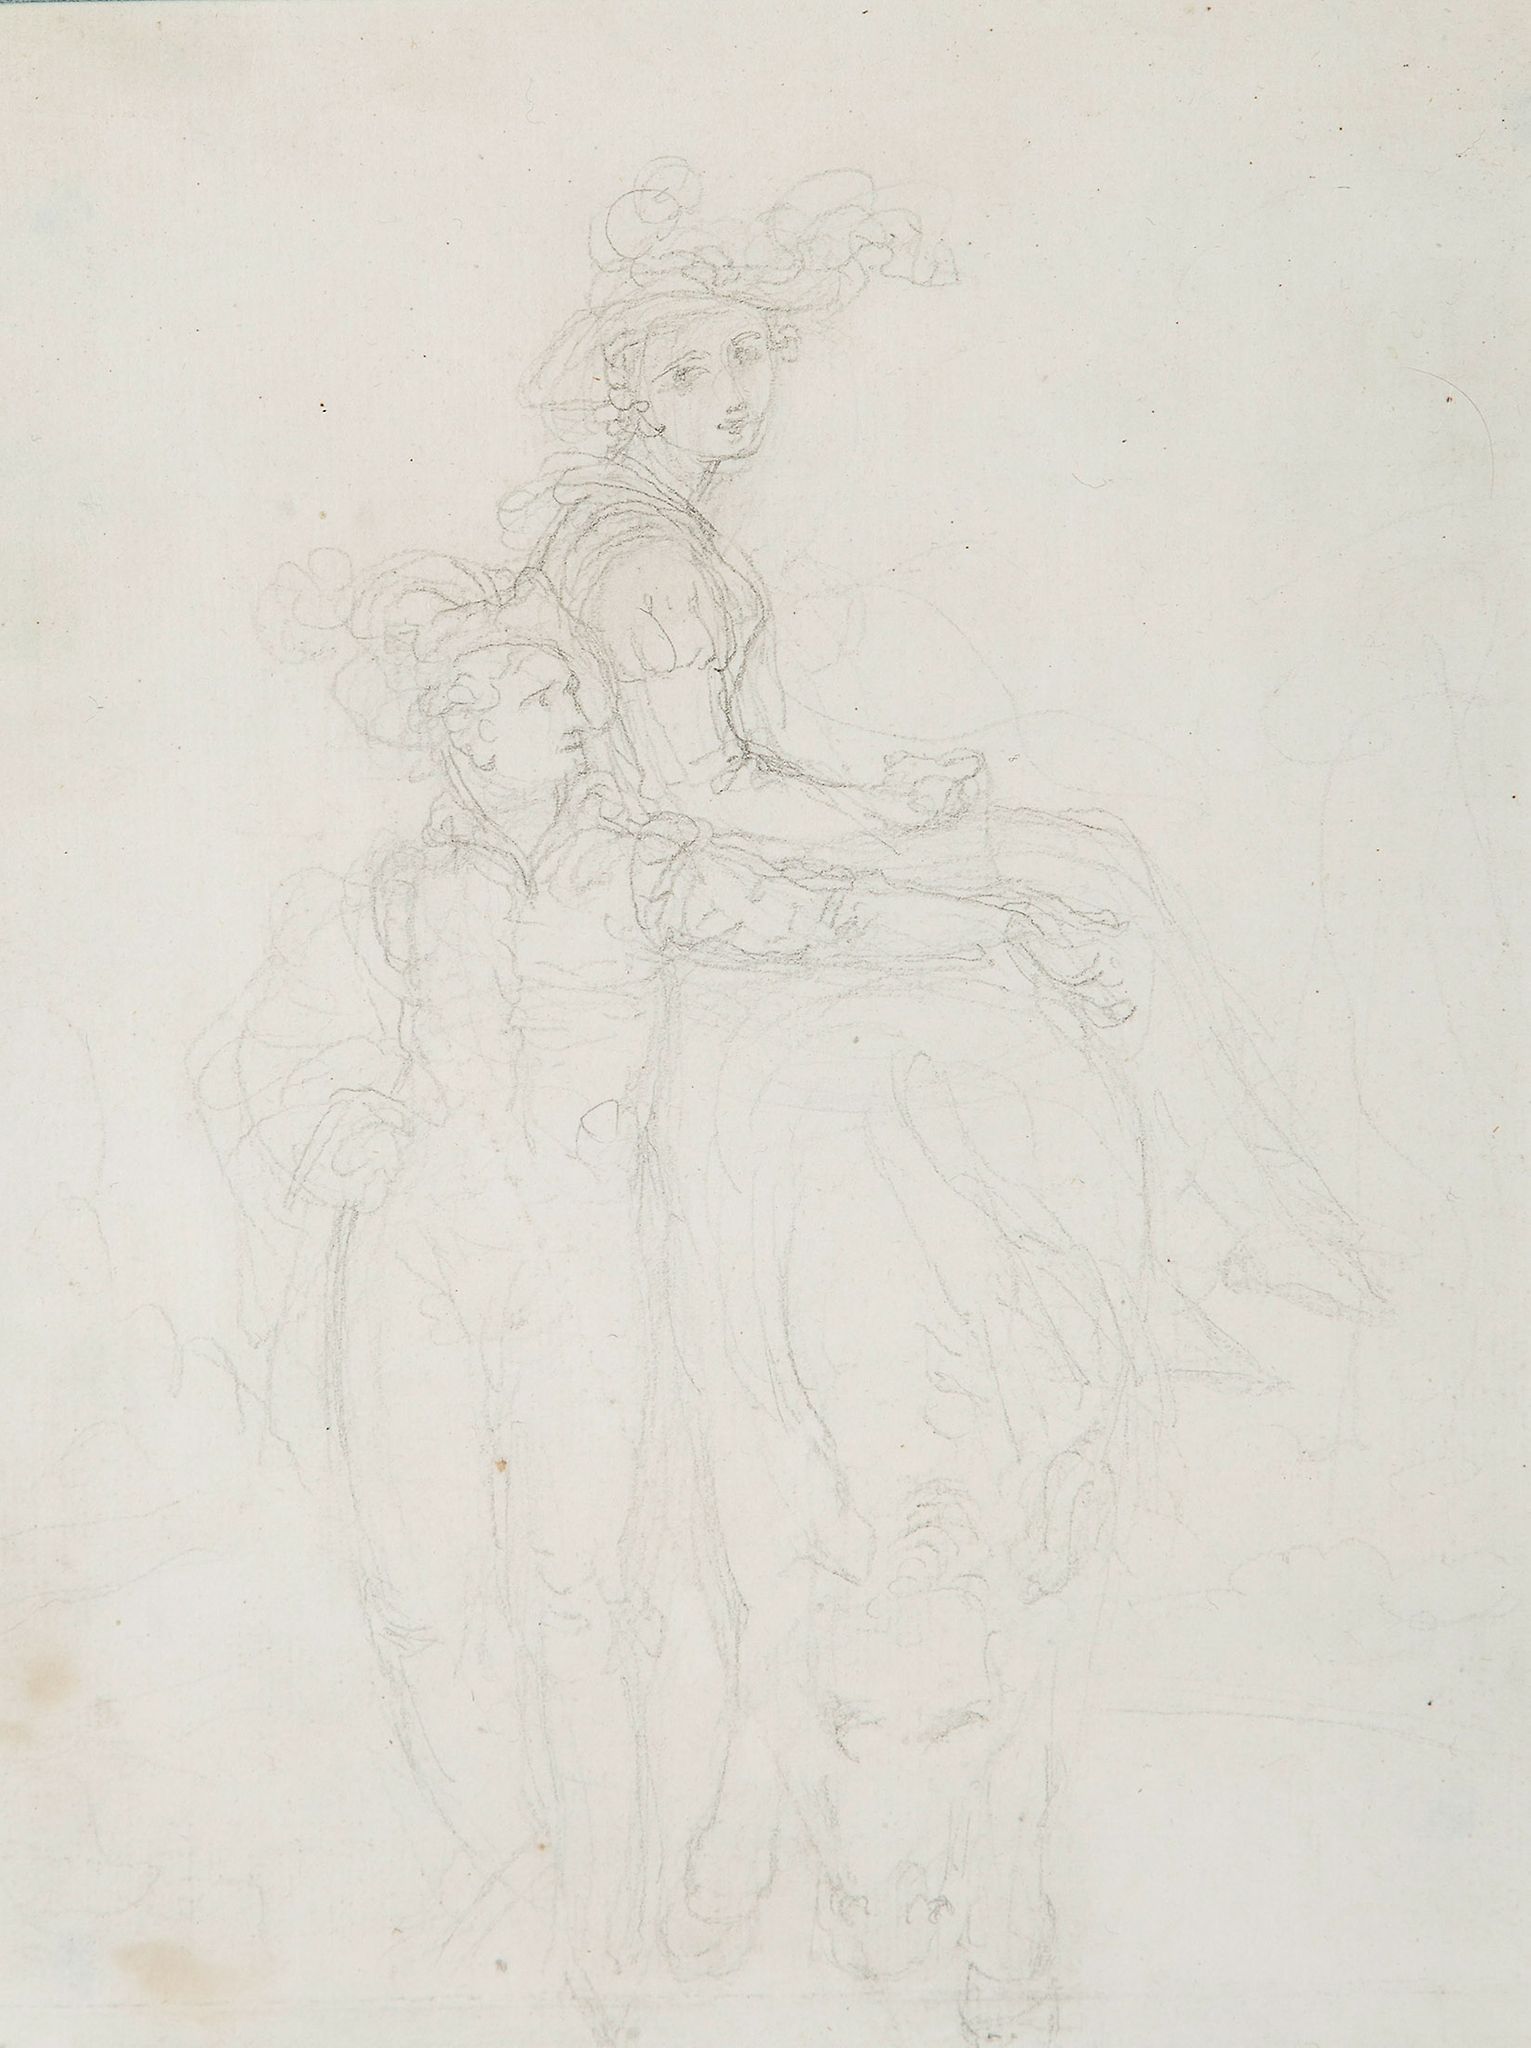 Richard Cosway (1742-1821) - A self-portrait of the artist and his wife, Maria  Graphite, on laid